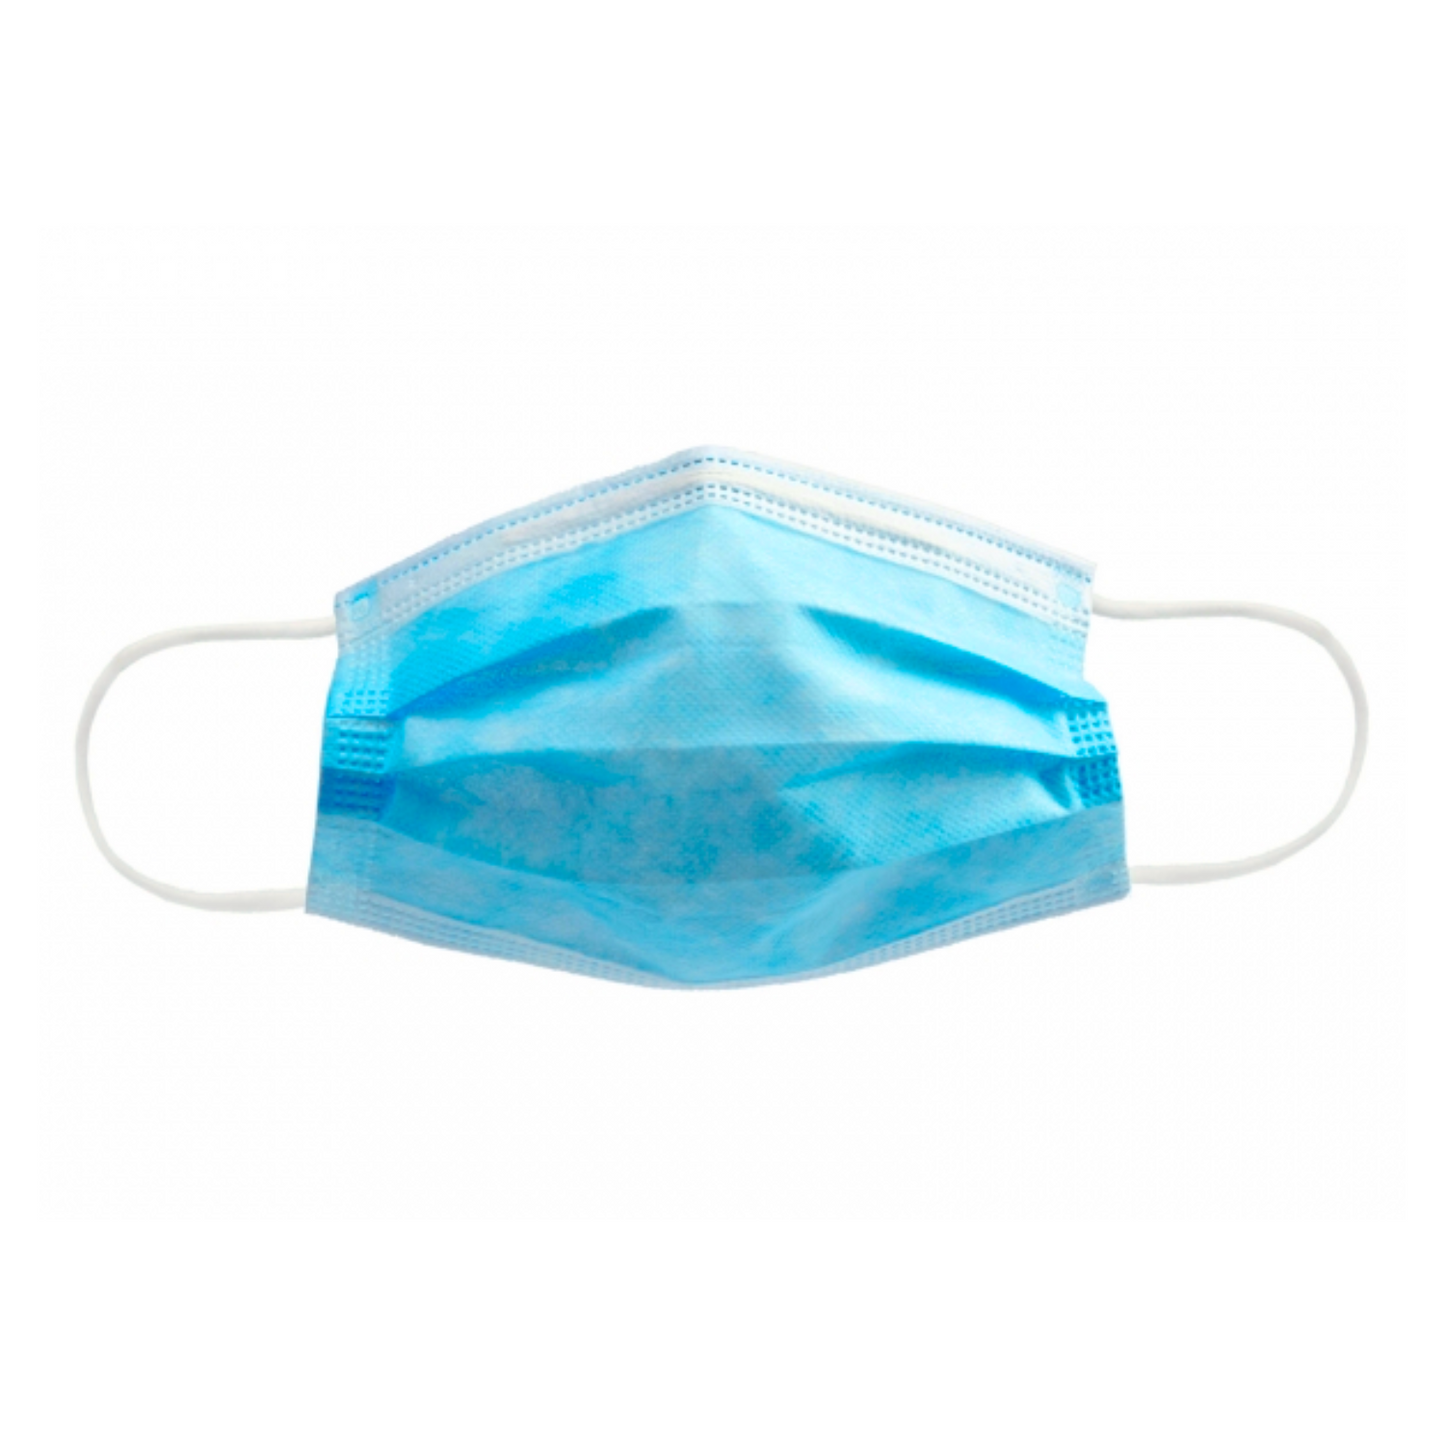 Disposable Face Mask - 5 Pack